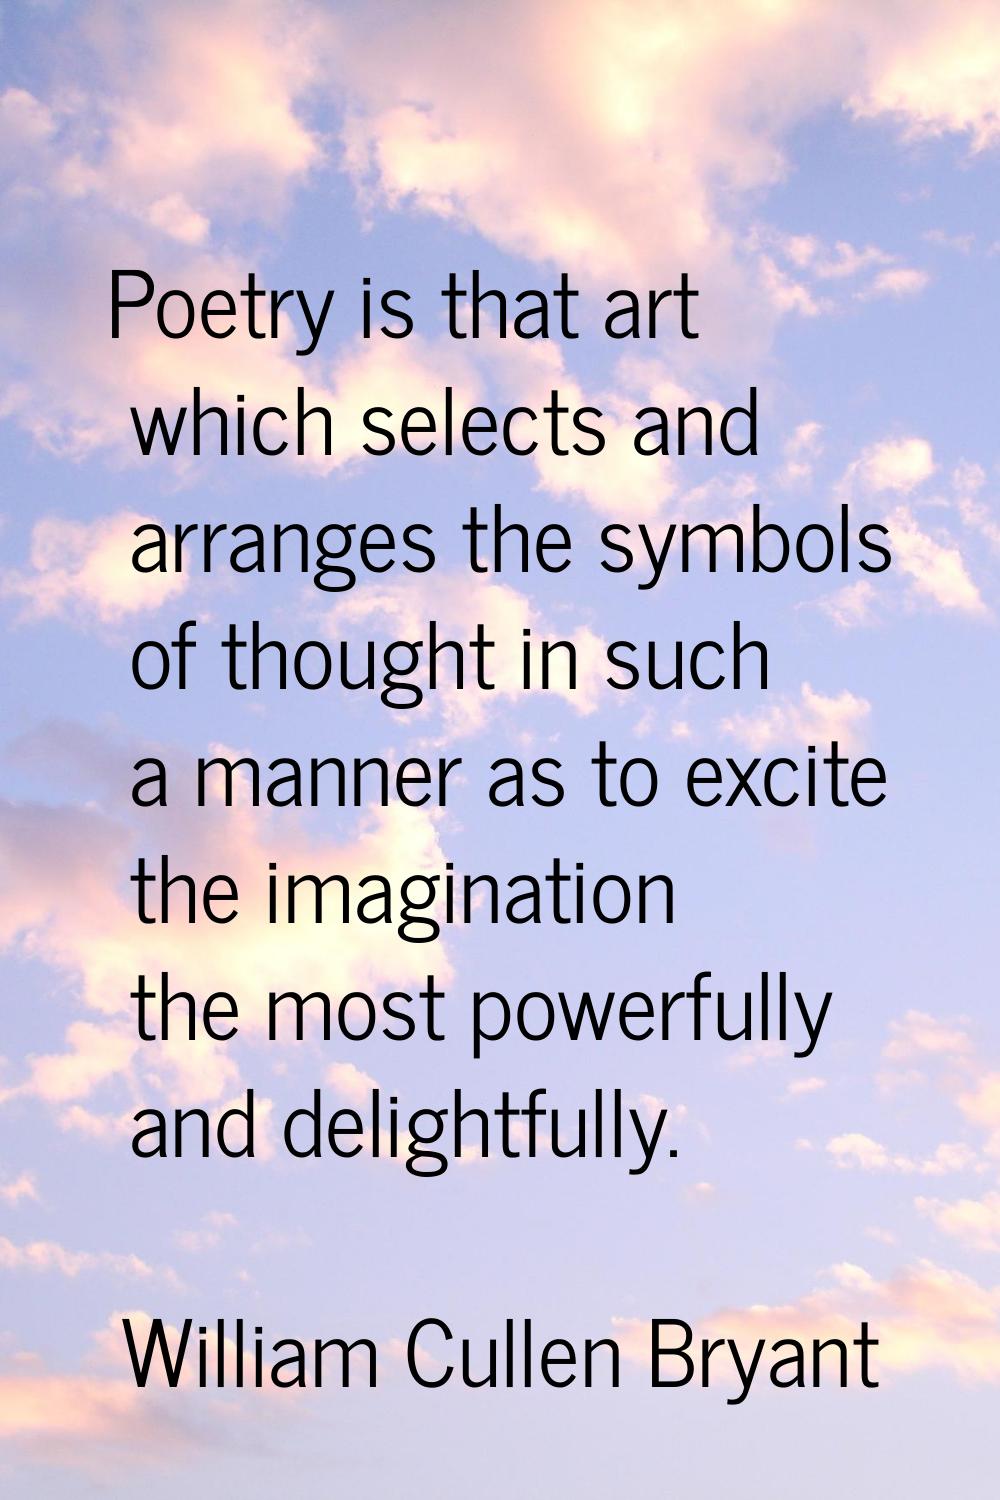 Poetry is that art which selects and arranges the symbols of thought in such a manner as to excite 